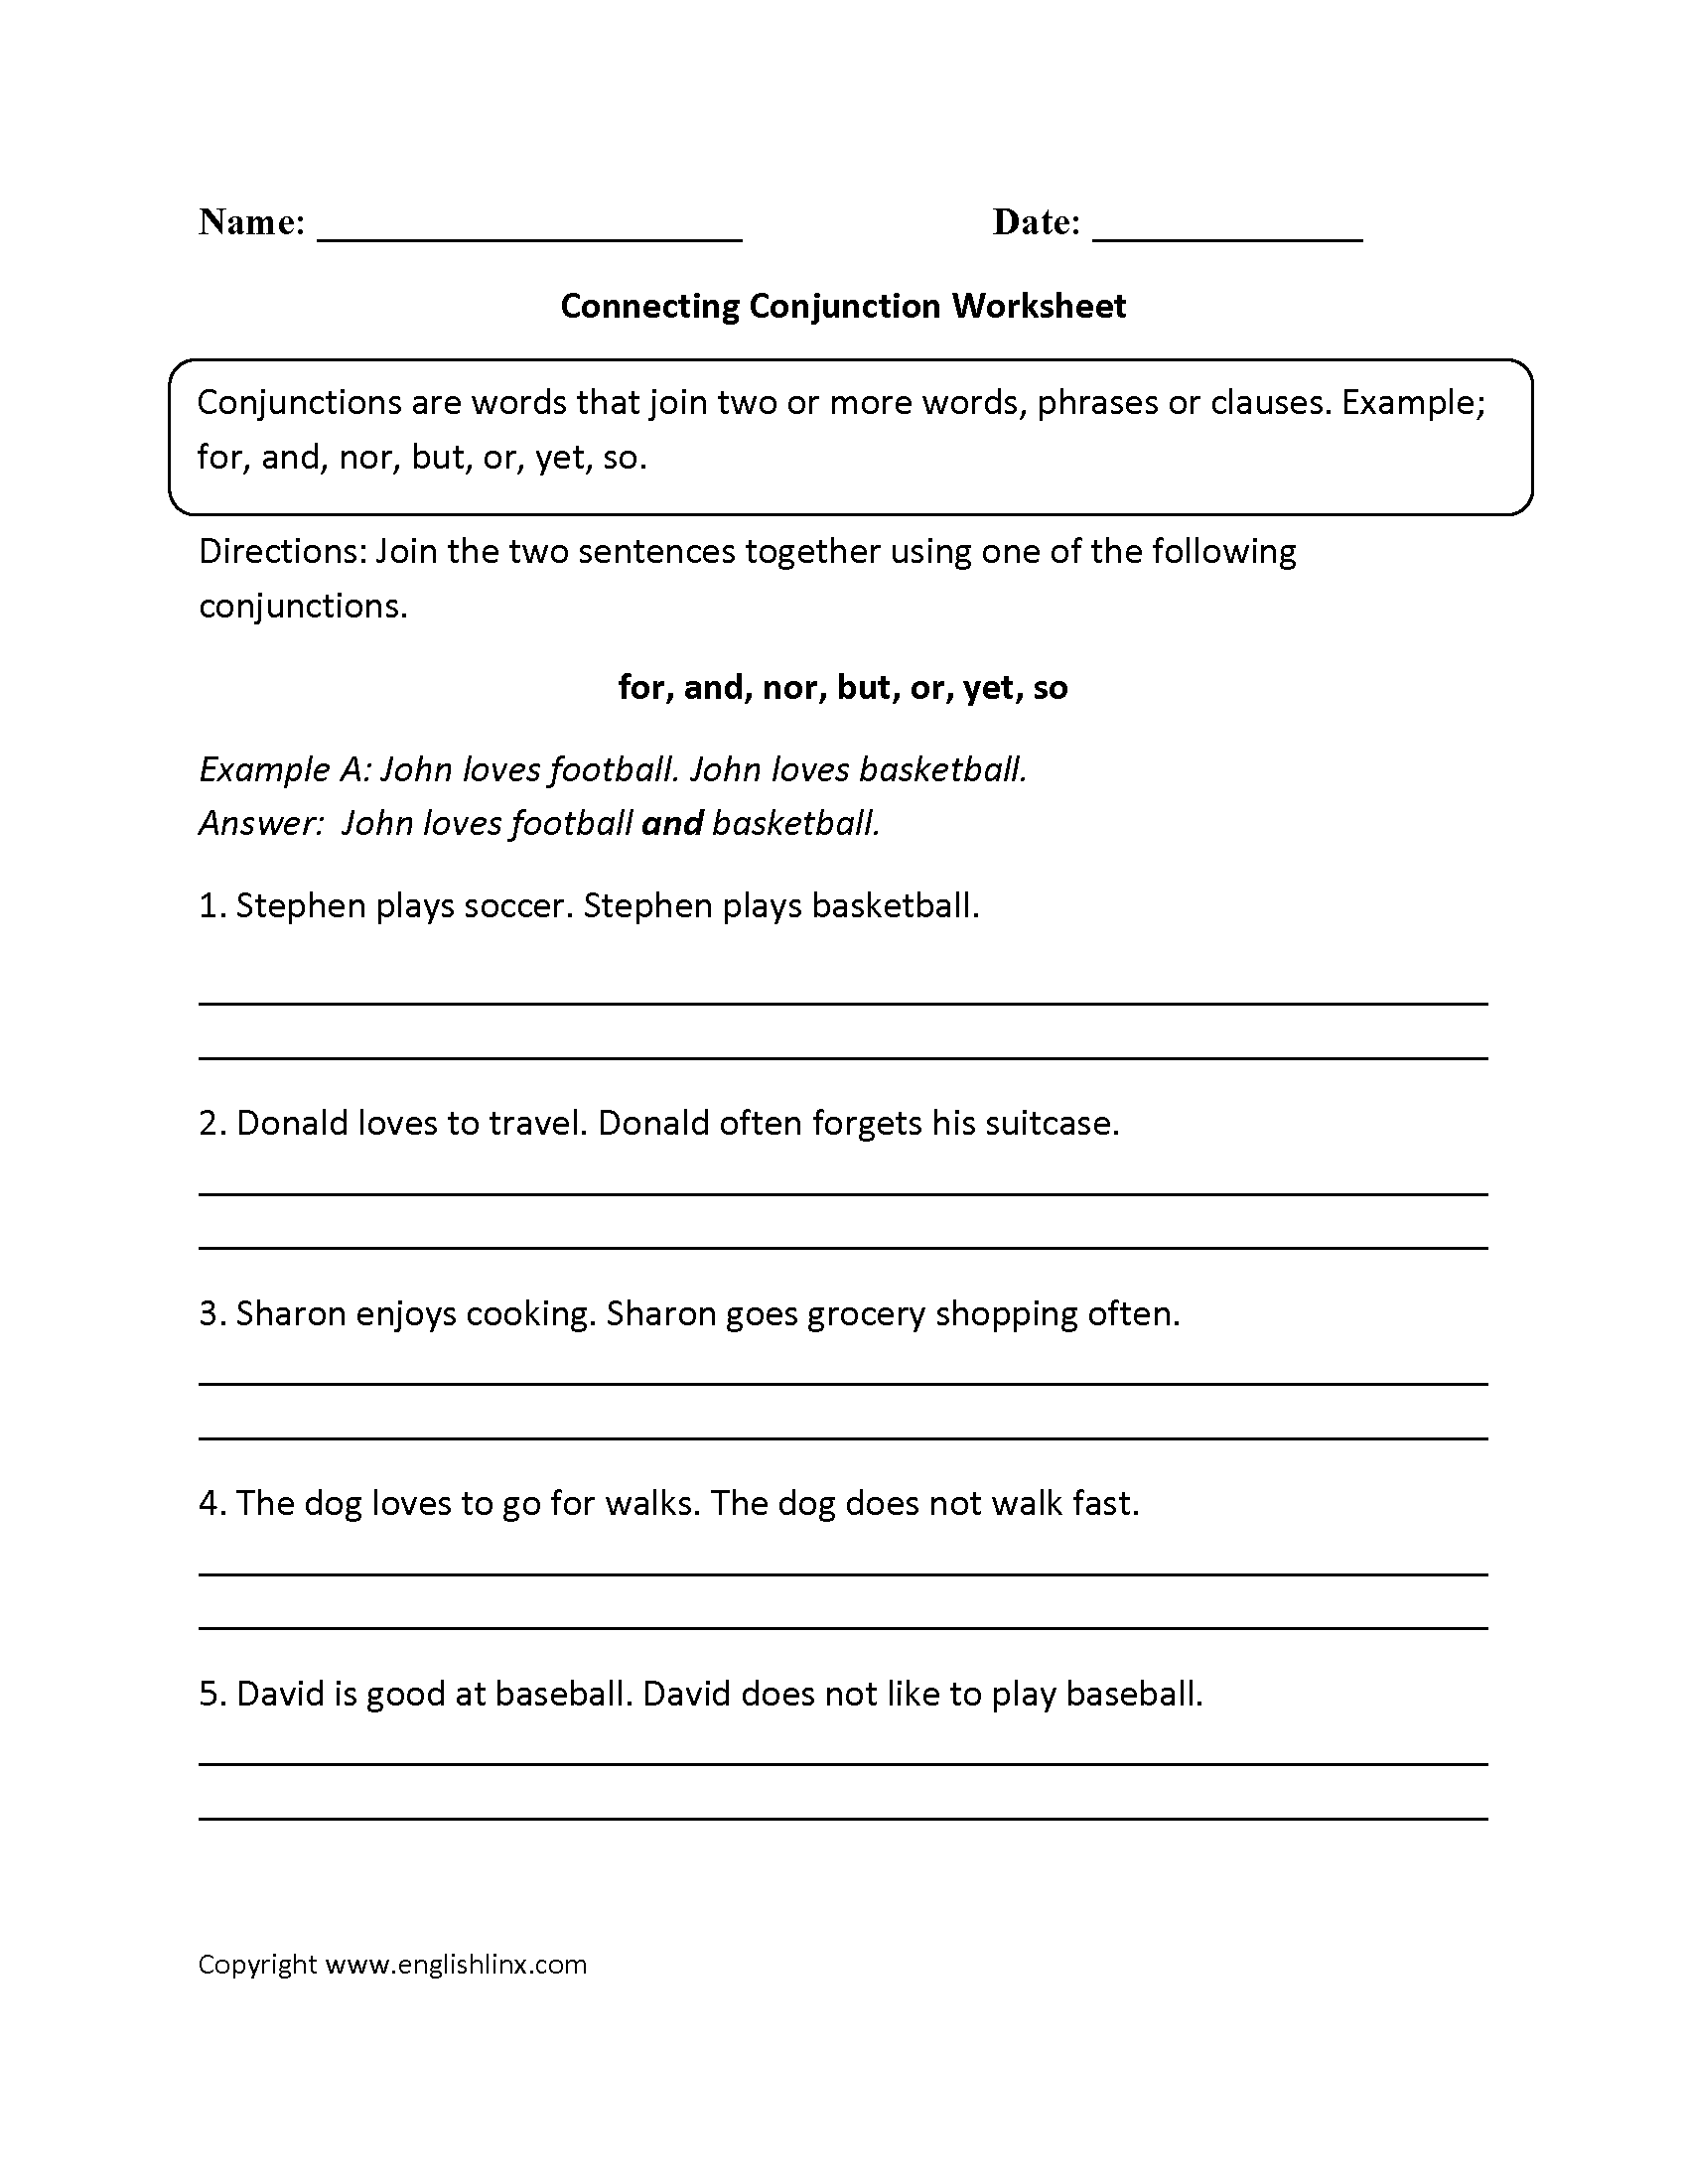 Connecting Conjunction Worksheets